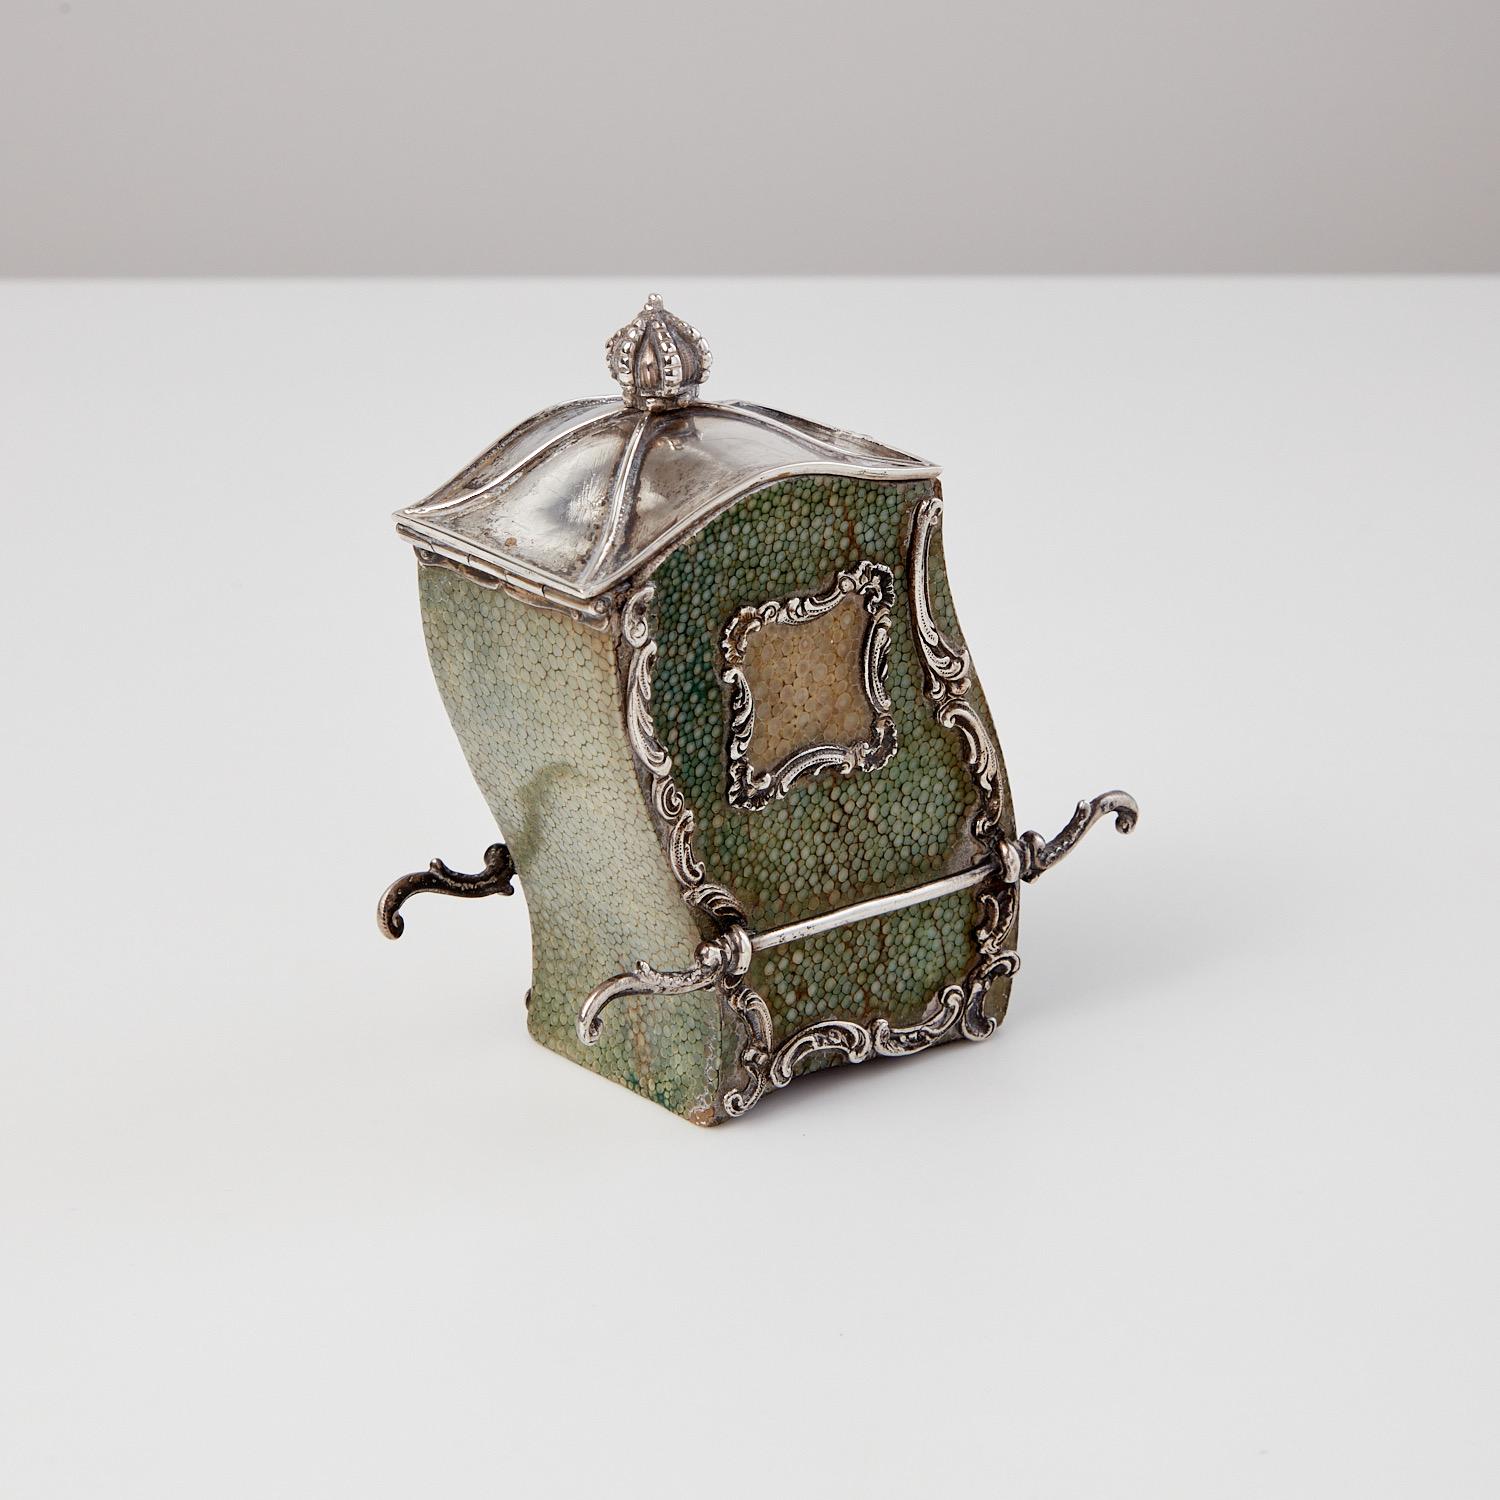 Antique Miniature Shagreen & Silver Tea Caddy France Circa 1840  In Good Condition For Sale In London, GB